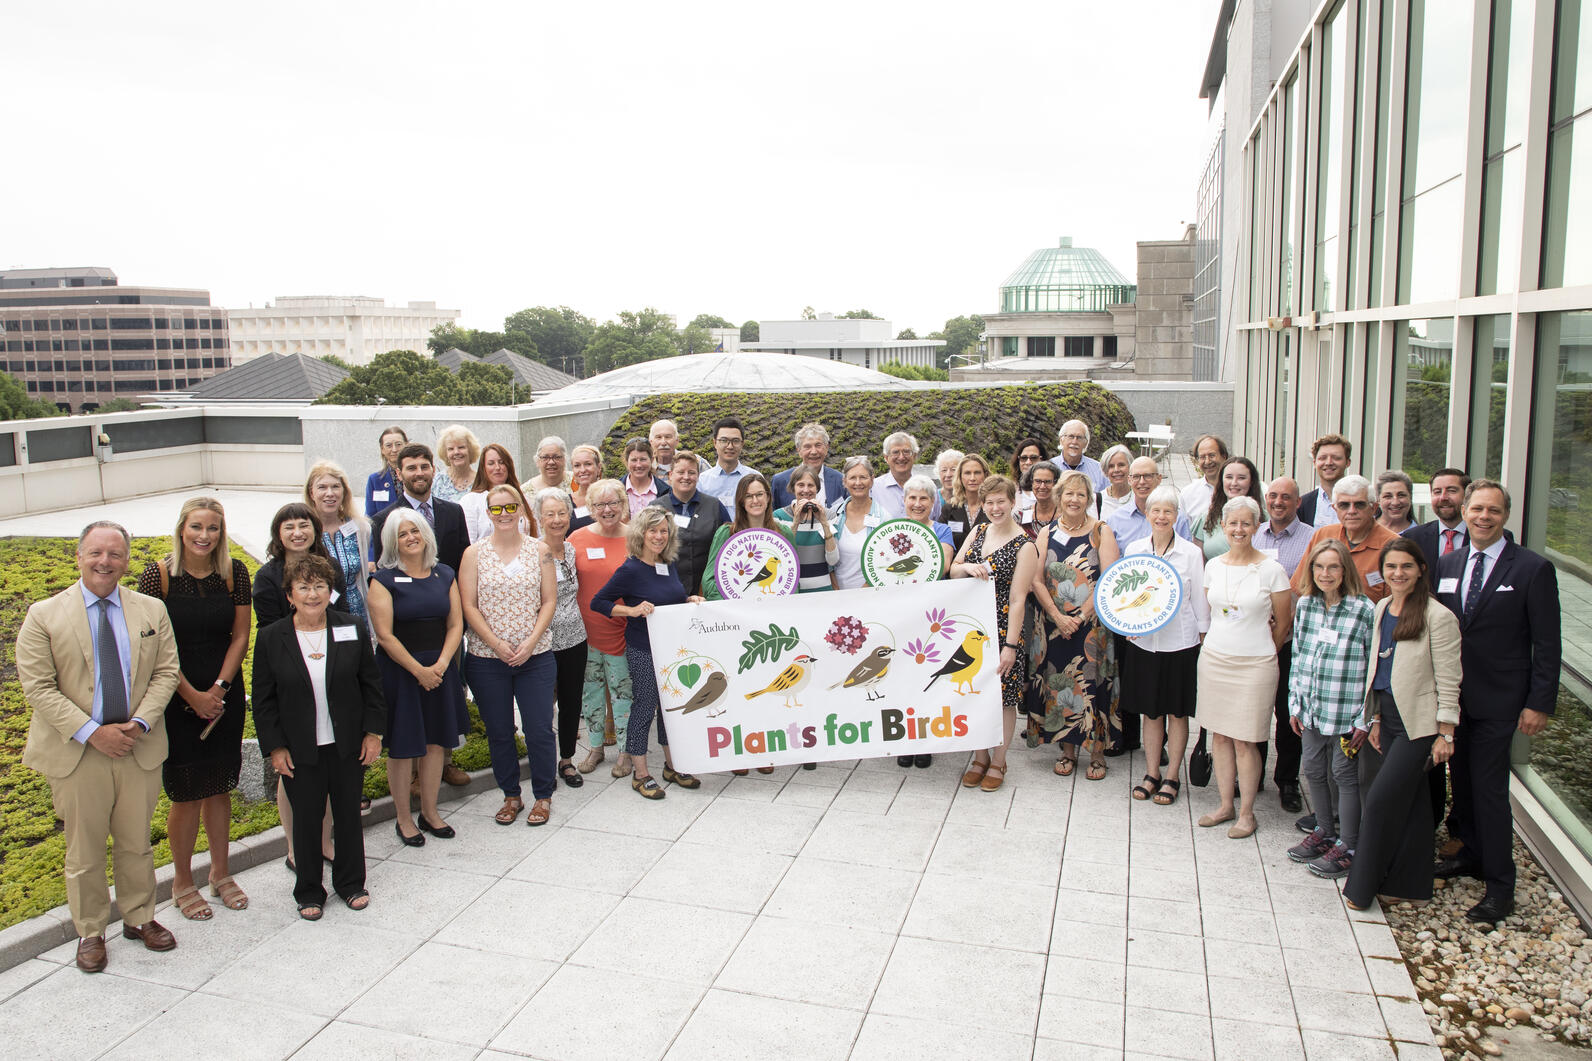 Members flocked to the legislature to advocate for native plants on Advocacy Day 2022